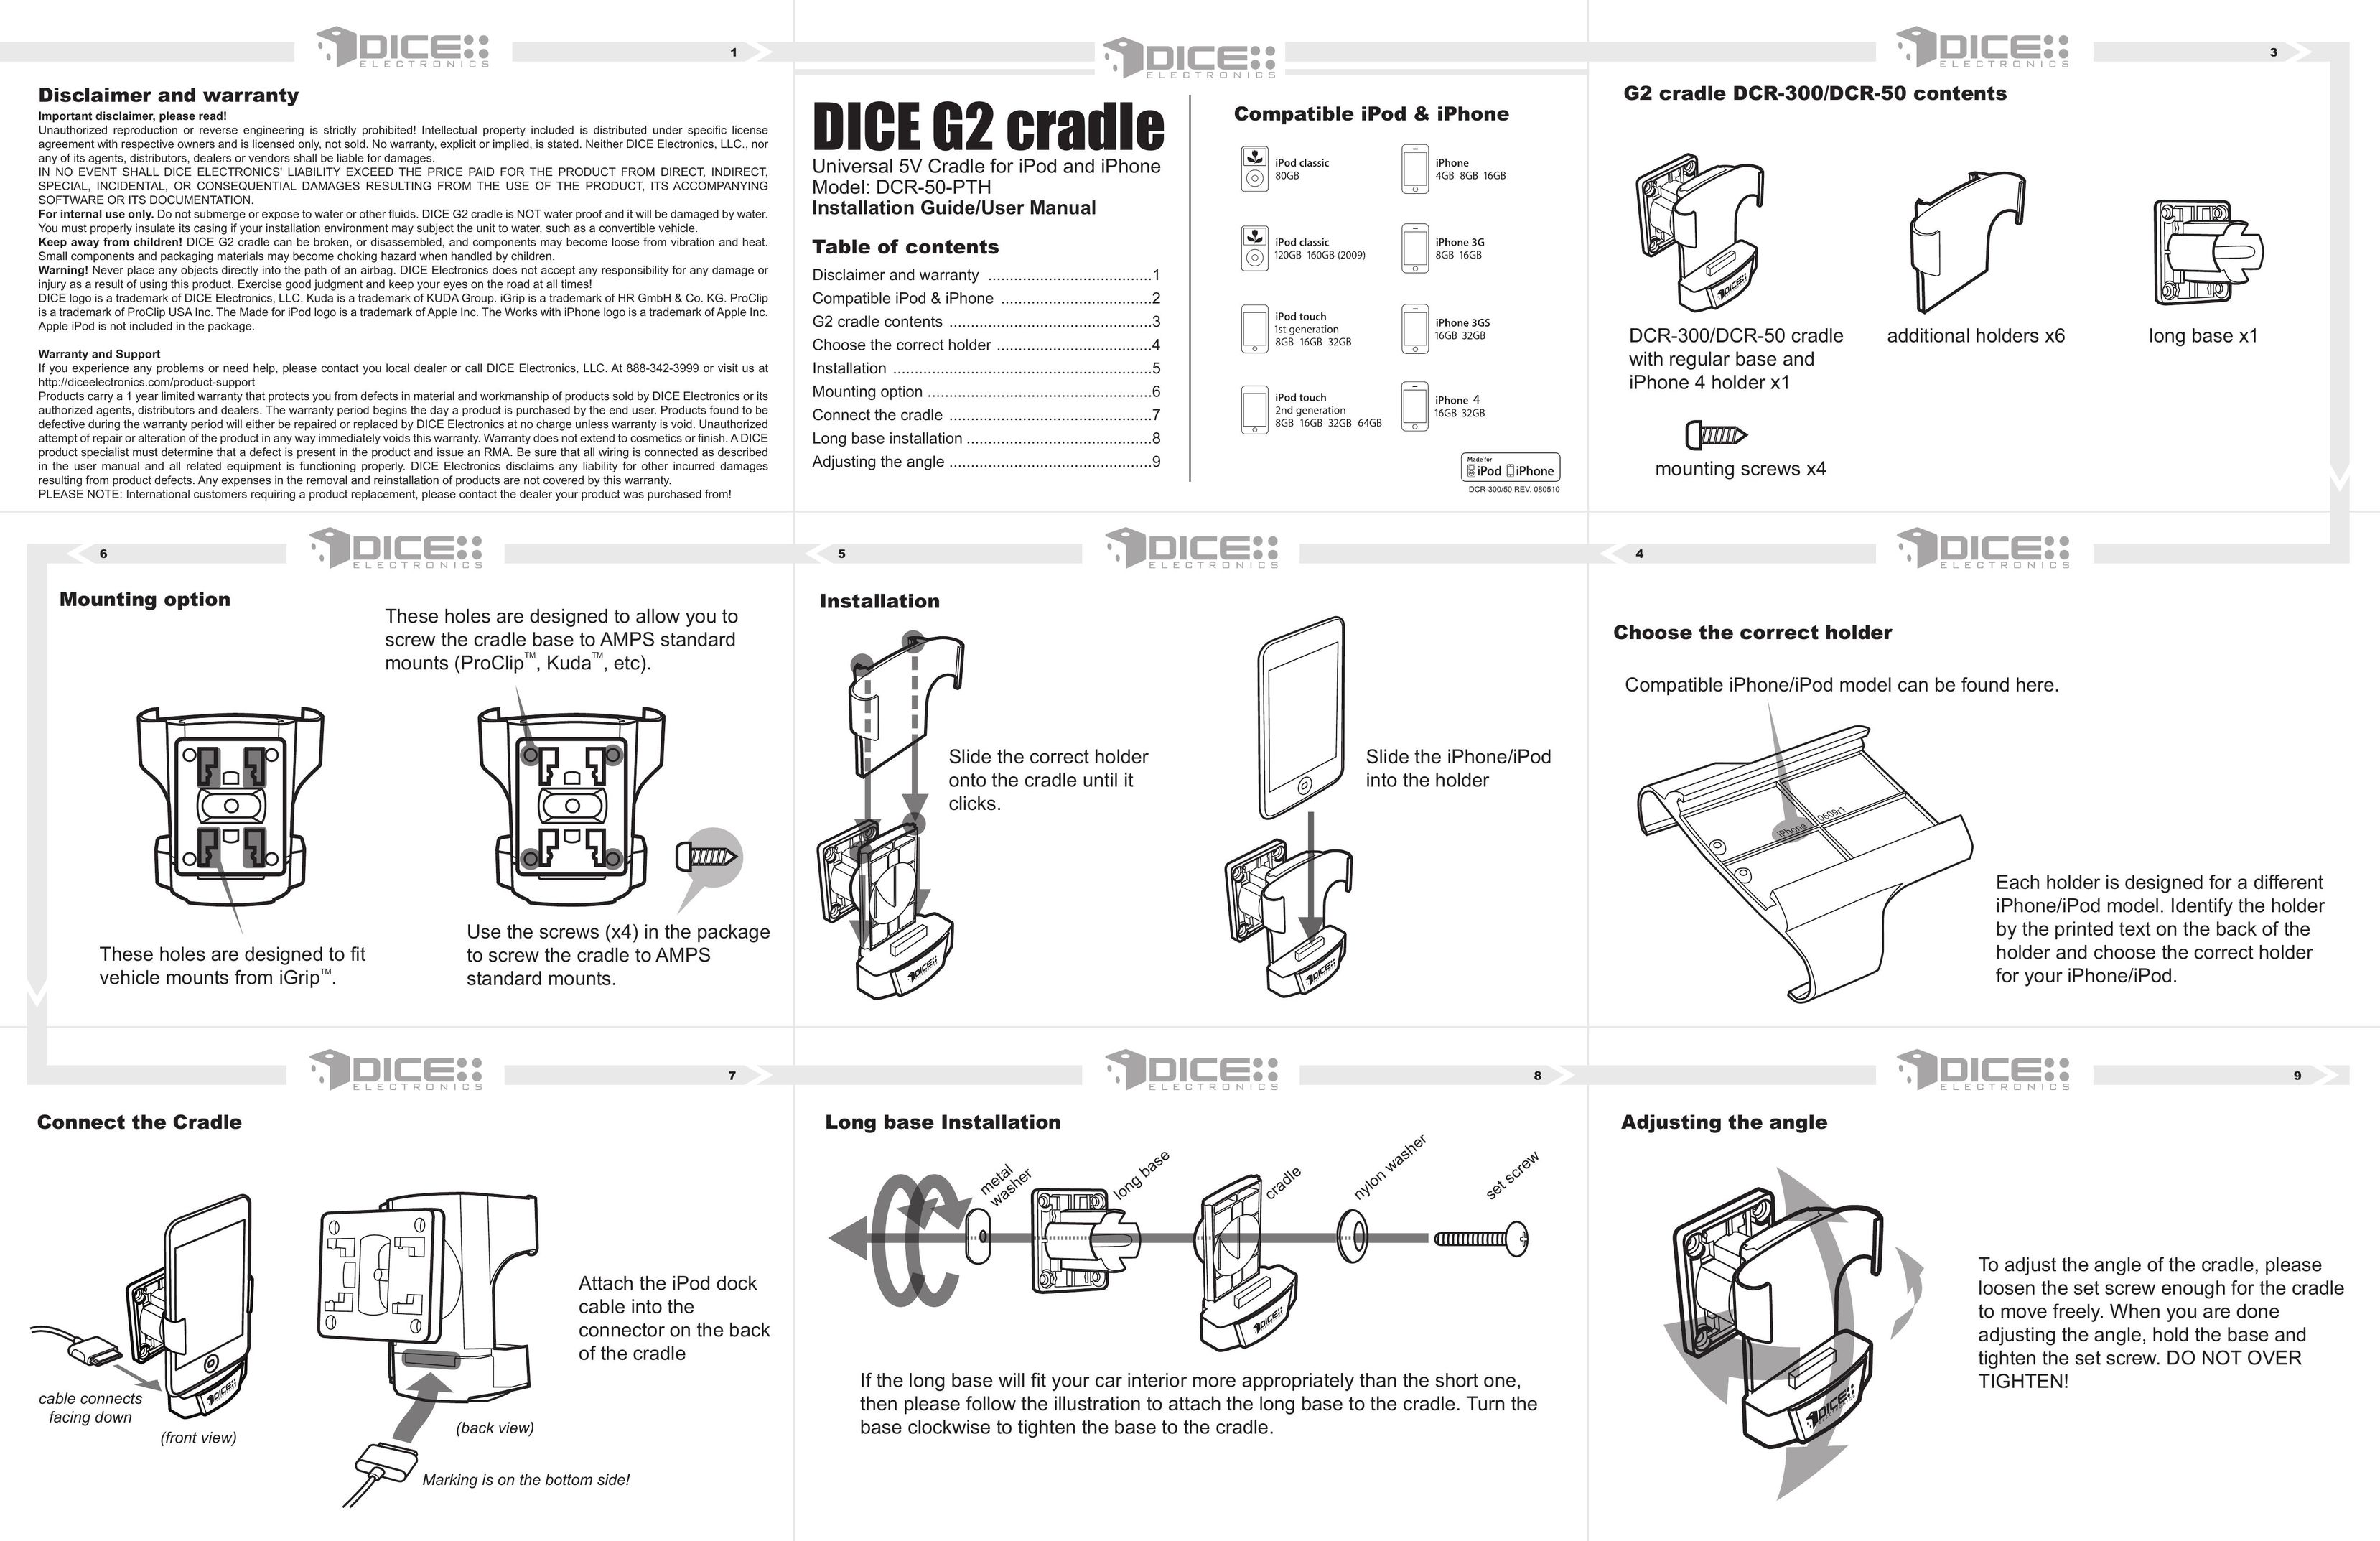 Dice electronic DCR-300 Carrying Case User Manual